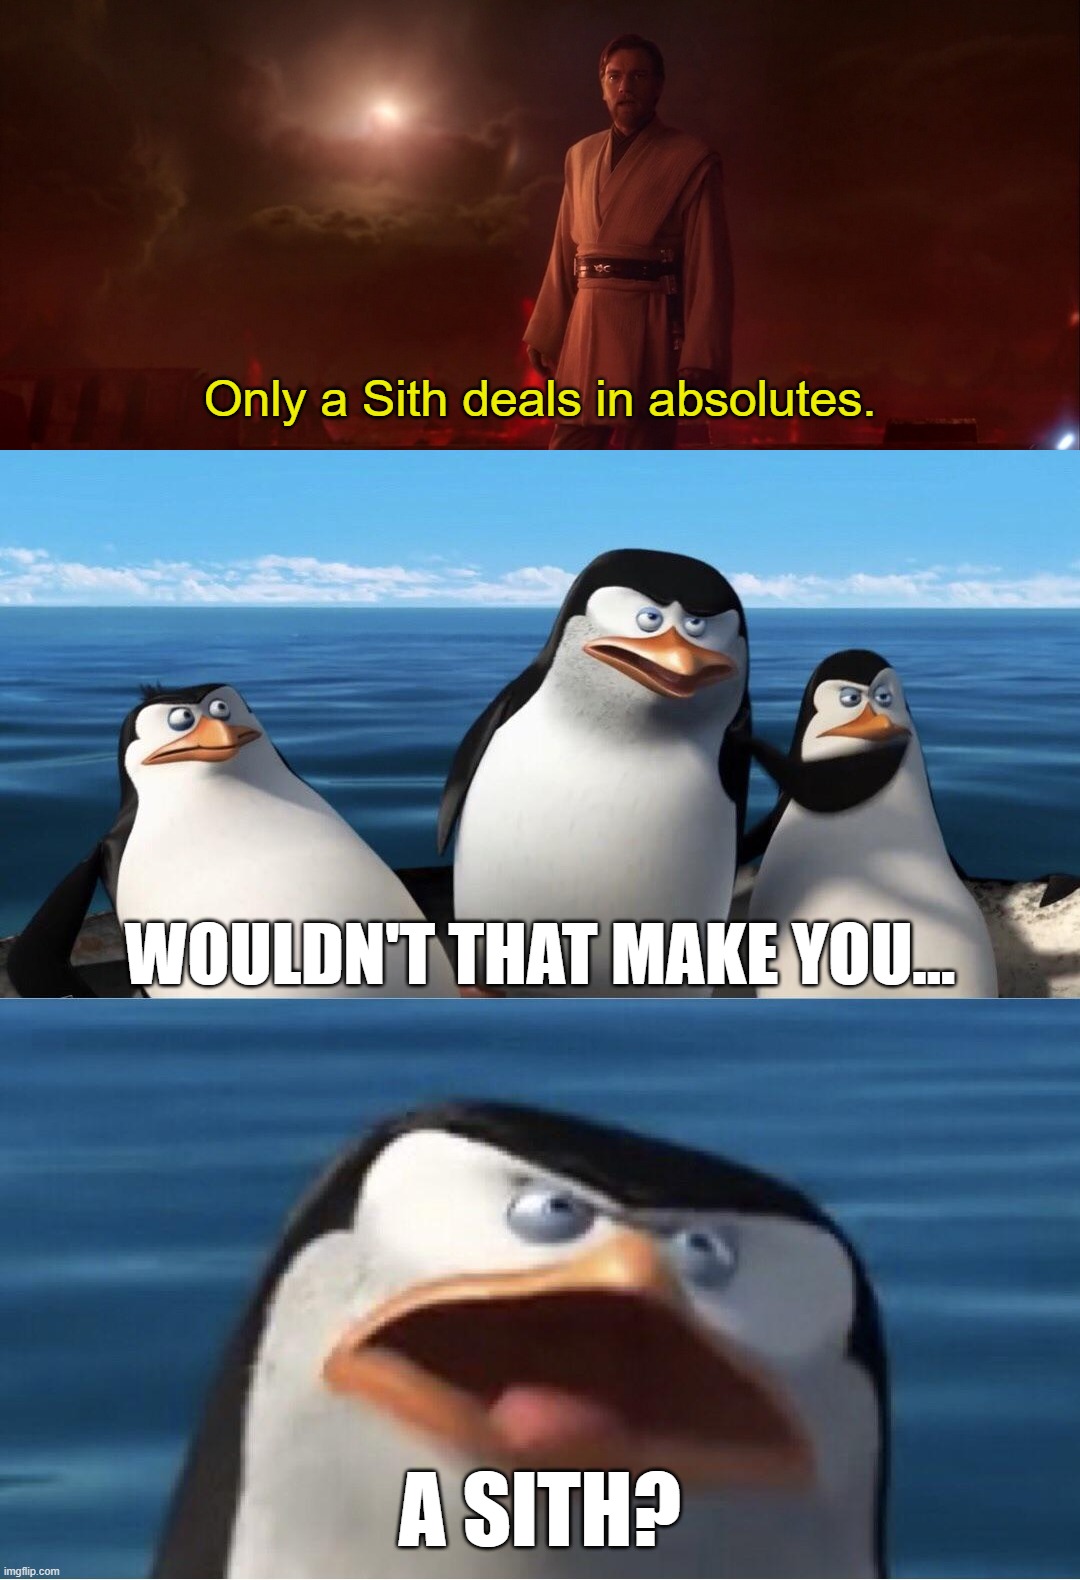 Only a Sith deals in absolutes. | image tagged in only a sith deals in absolutes,wouldn't that make you | made w/ Imgflip meme maker